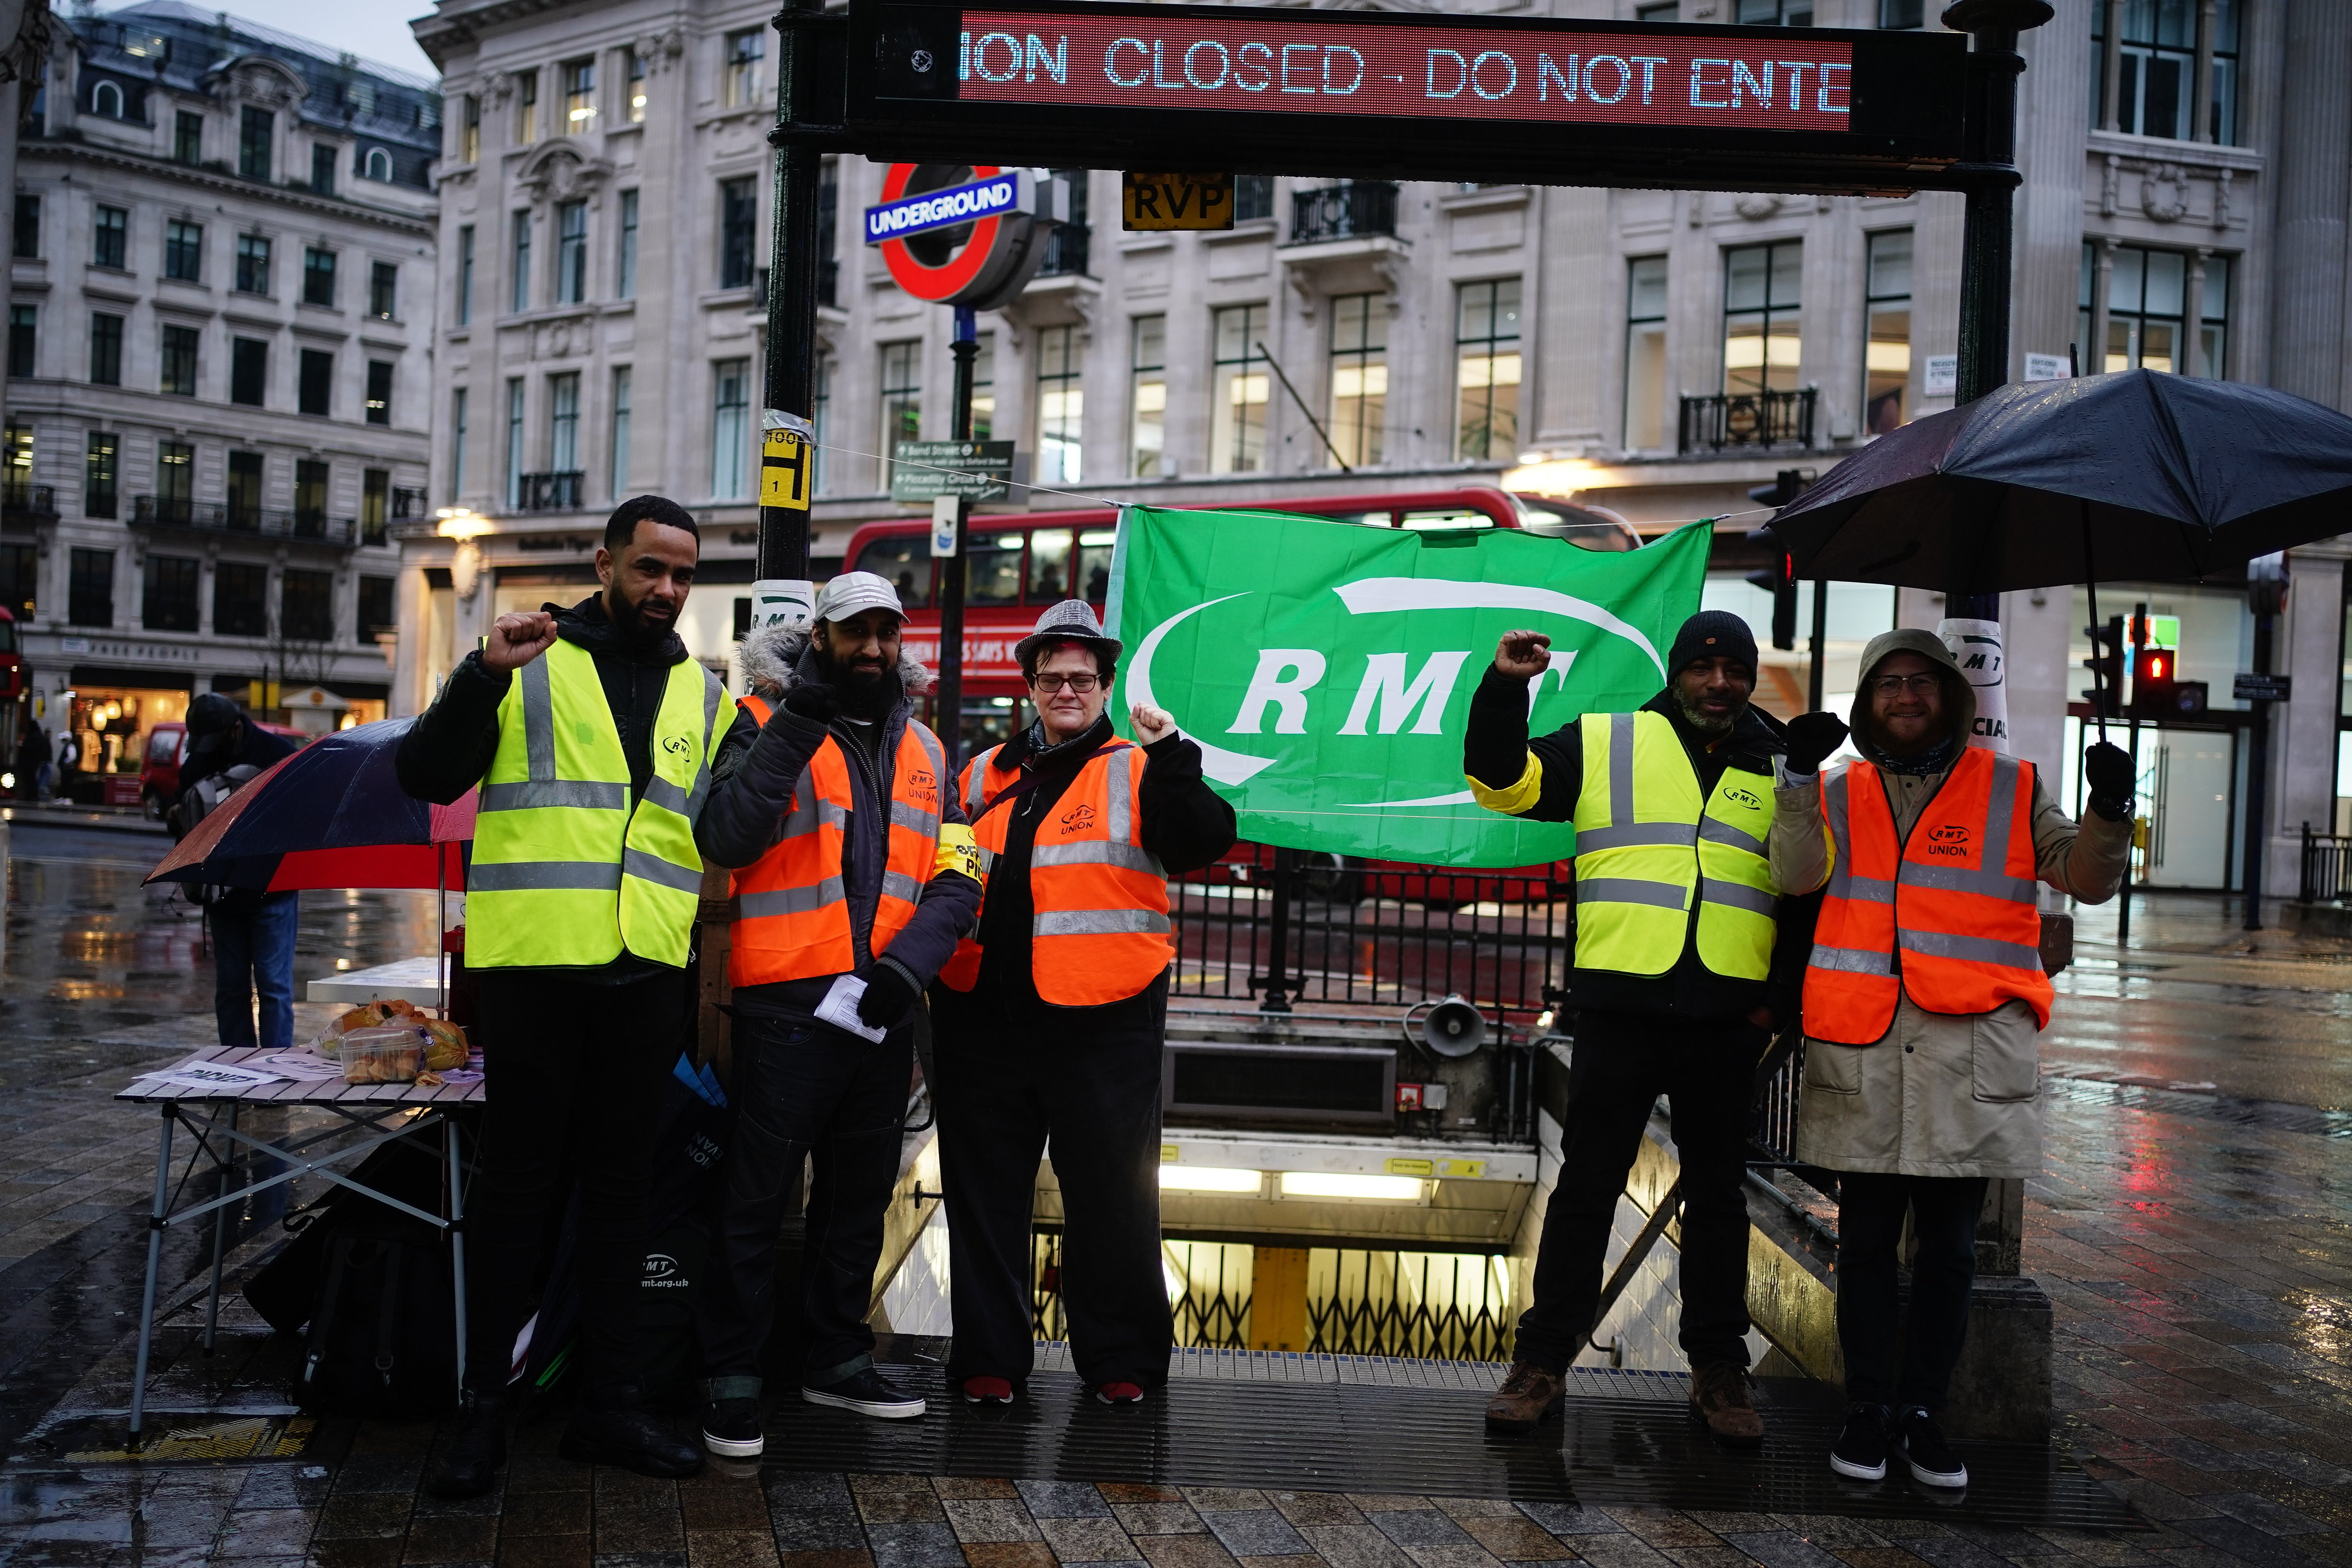 Members of the RMT union on a picket line outside Oxford Street Underground station (Aaron Chown/PA)